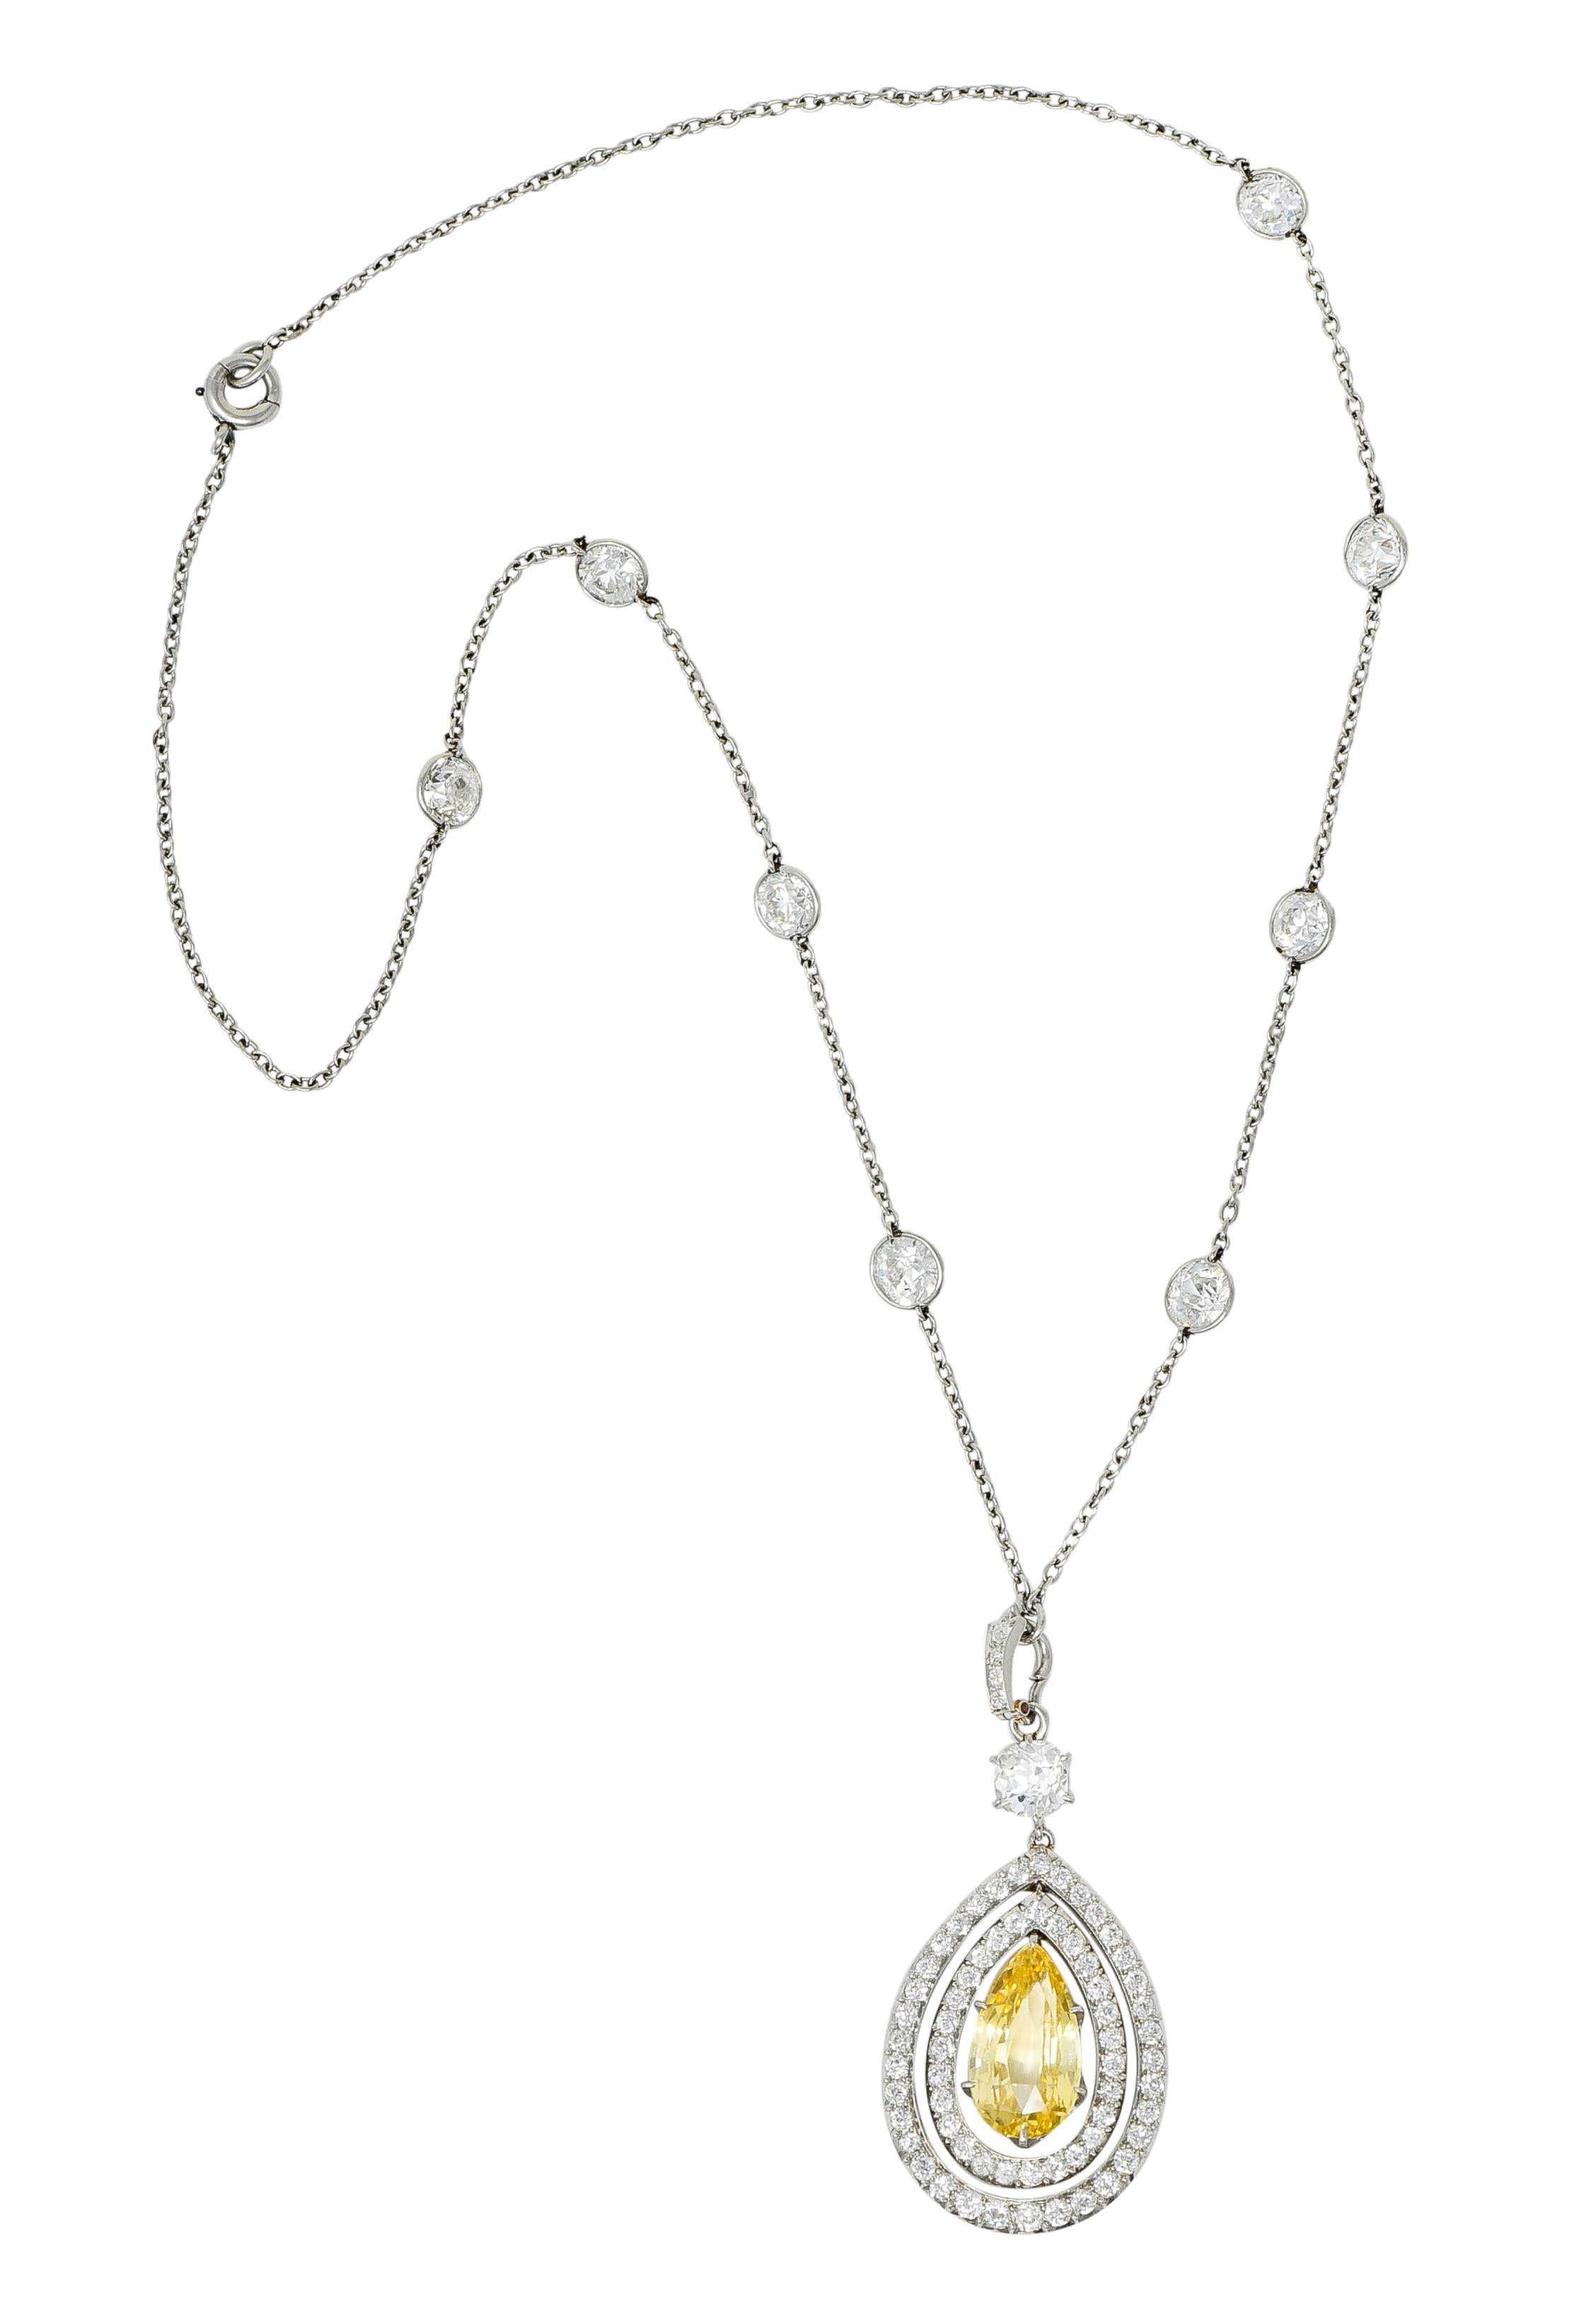 Designed as a diamonds-by-the-yard style chain suspending a double halo pear shaped enhancer, fully articulated,

Old European cut diamonds bezel set on chain weigh in total approximately 5.60 carats; H/I color with VS to SI clarity

Centering a